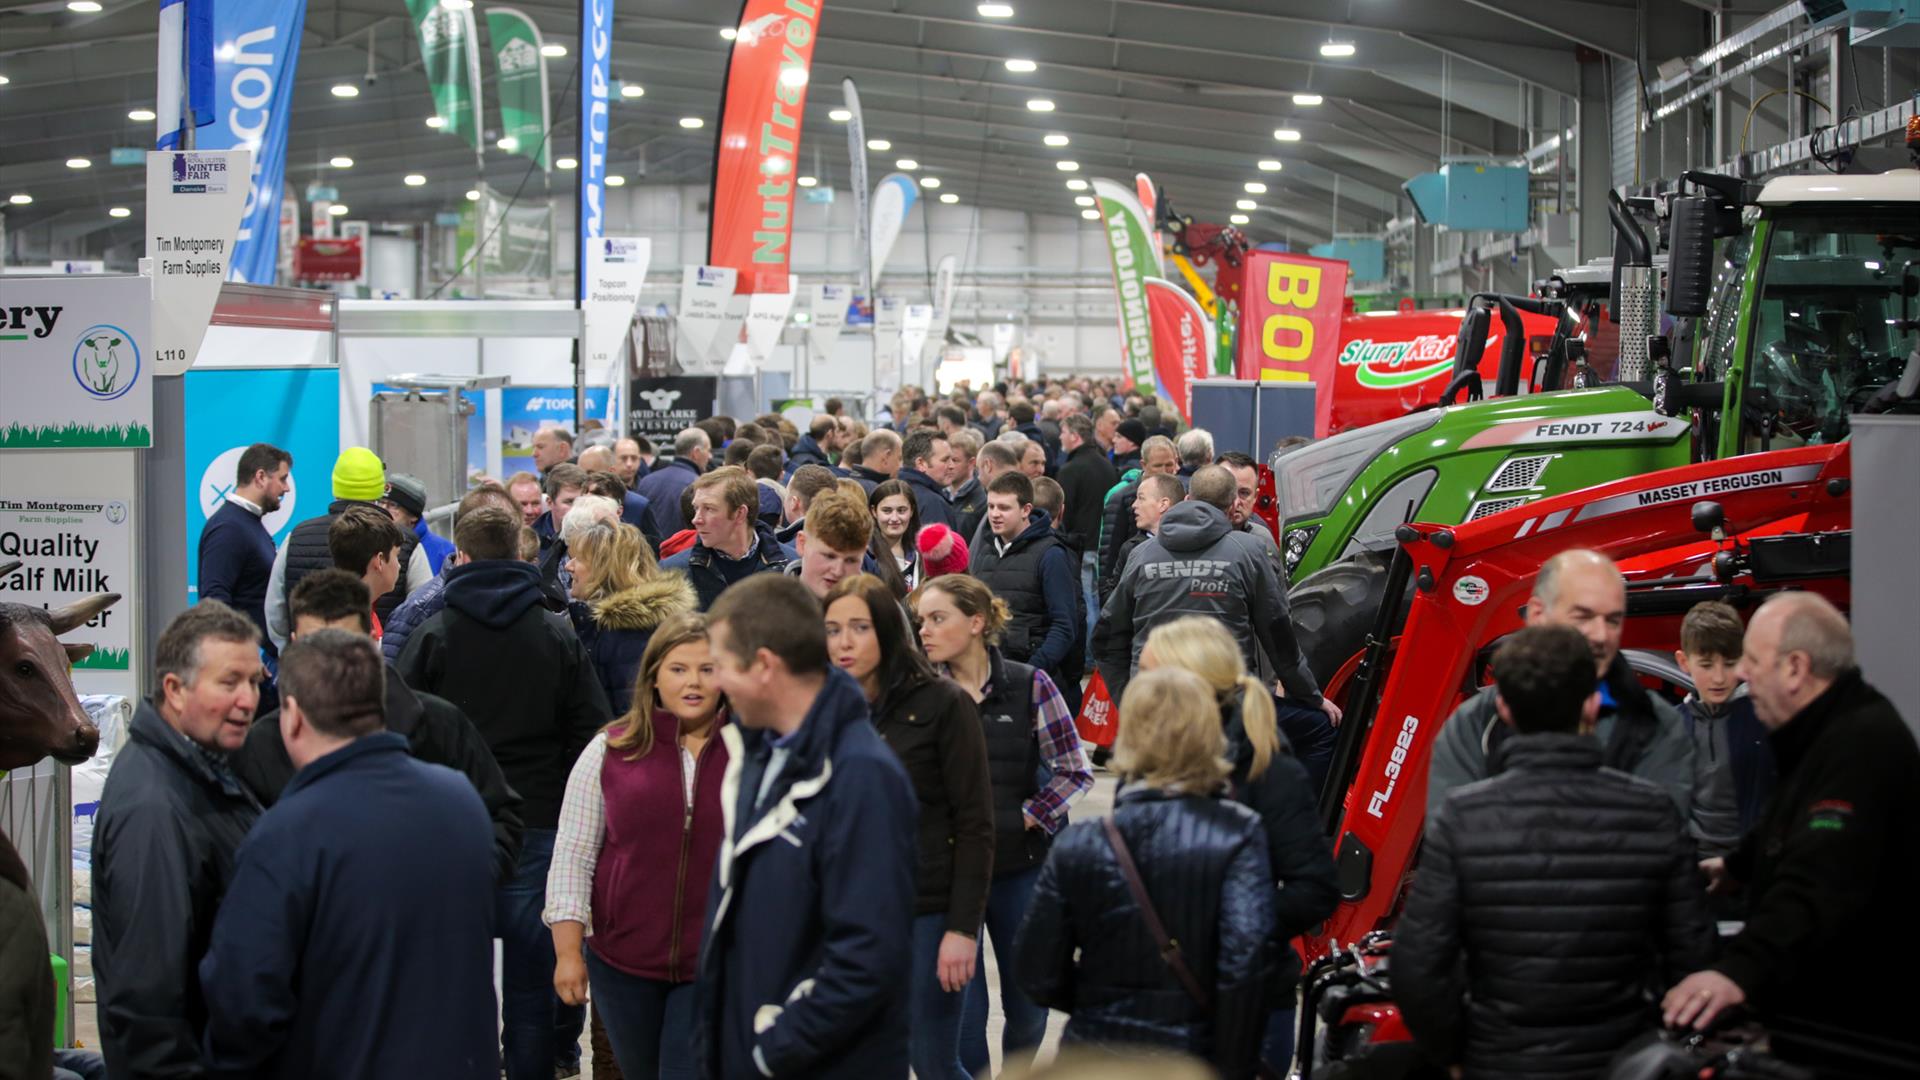 Image is of visitors at the Royal Ulster Winter Fair at Eikon Exhibition Centre